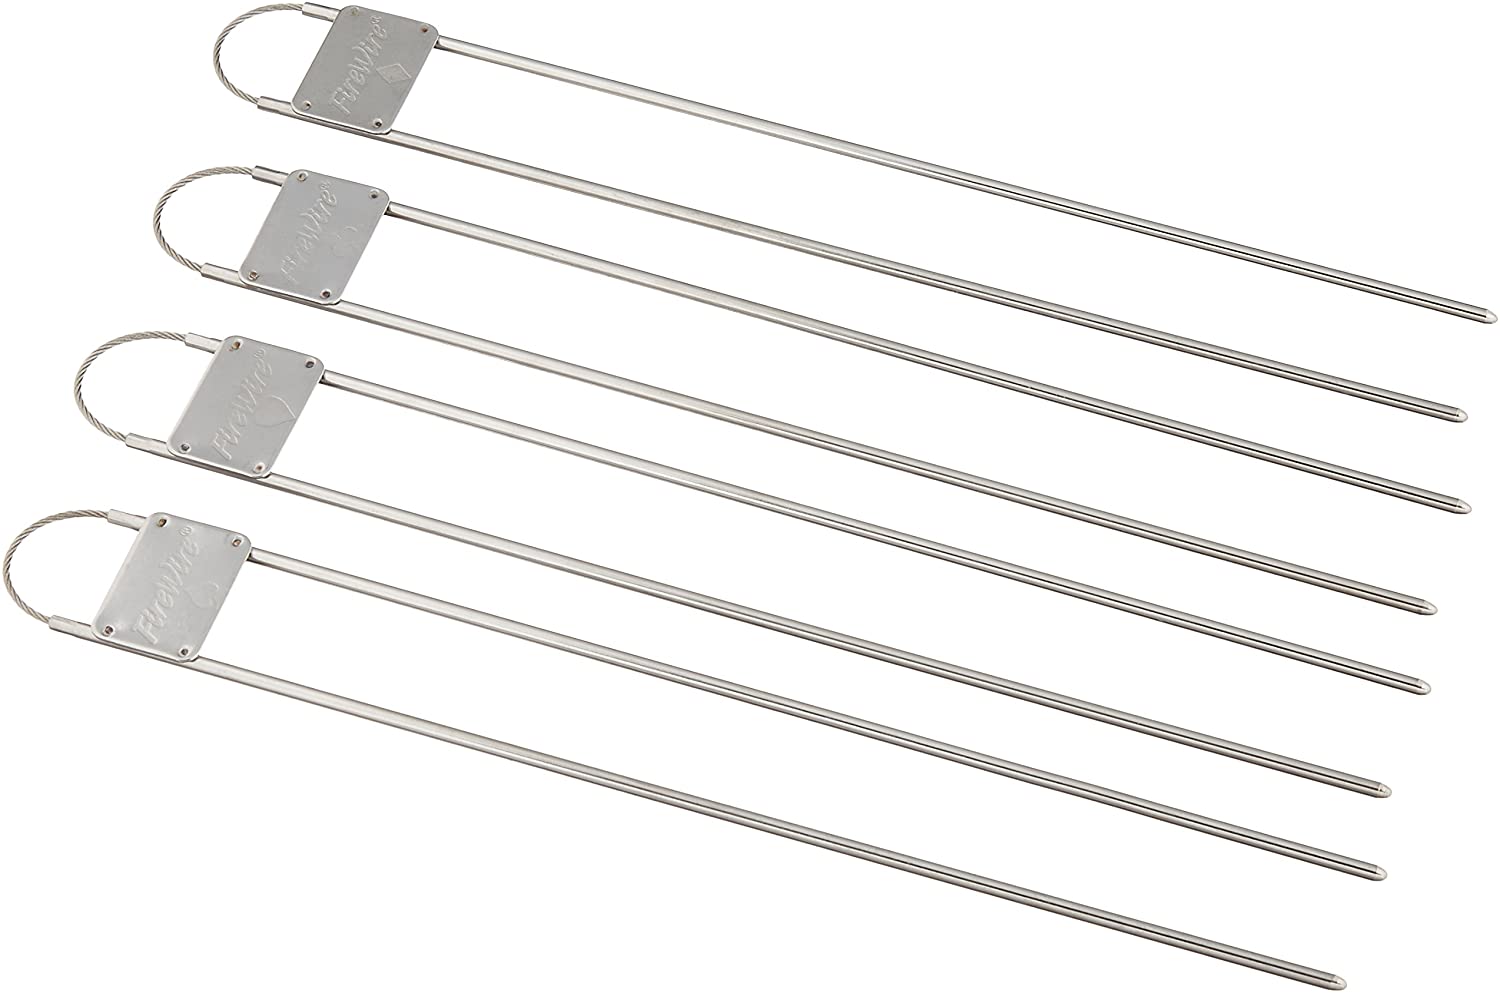 Smith's Double Prong Firewire, set/4